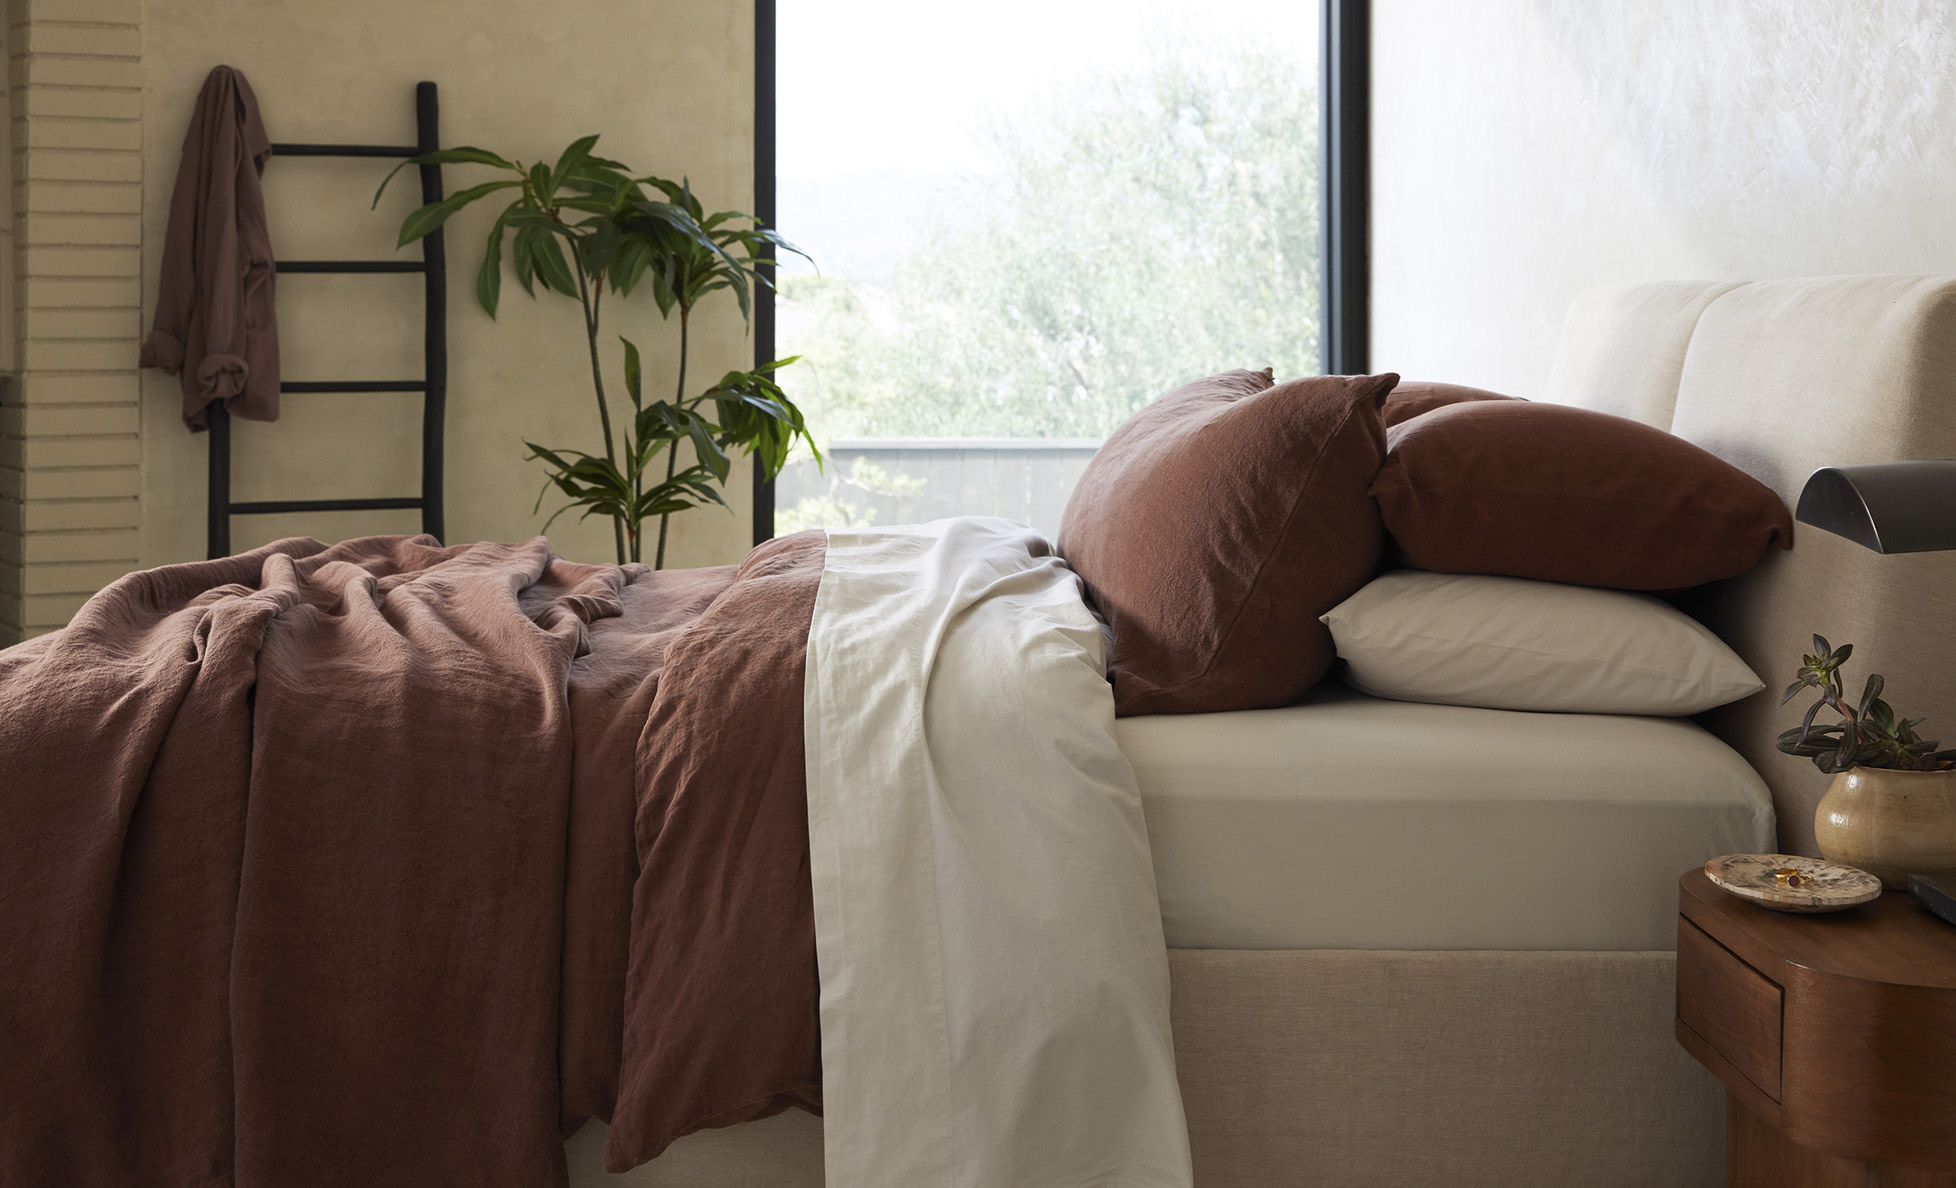 A neatly made bed with warm brown linen sheets